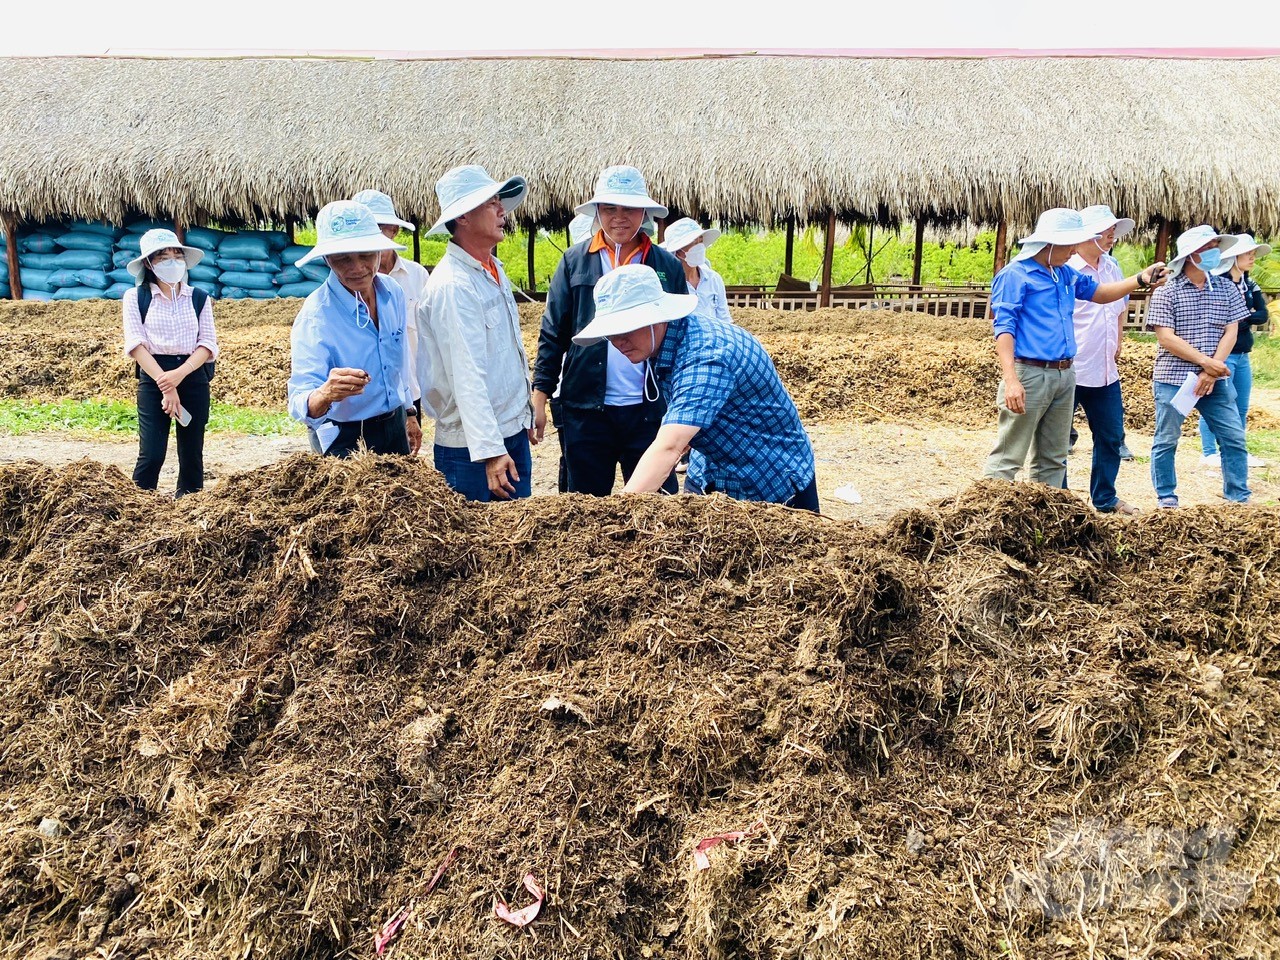 Circular agriculture models utilizing agricultural scrap and by-products in Vietnam are still not popular. Photo: LHV.